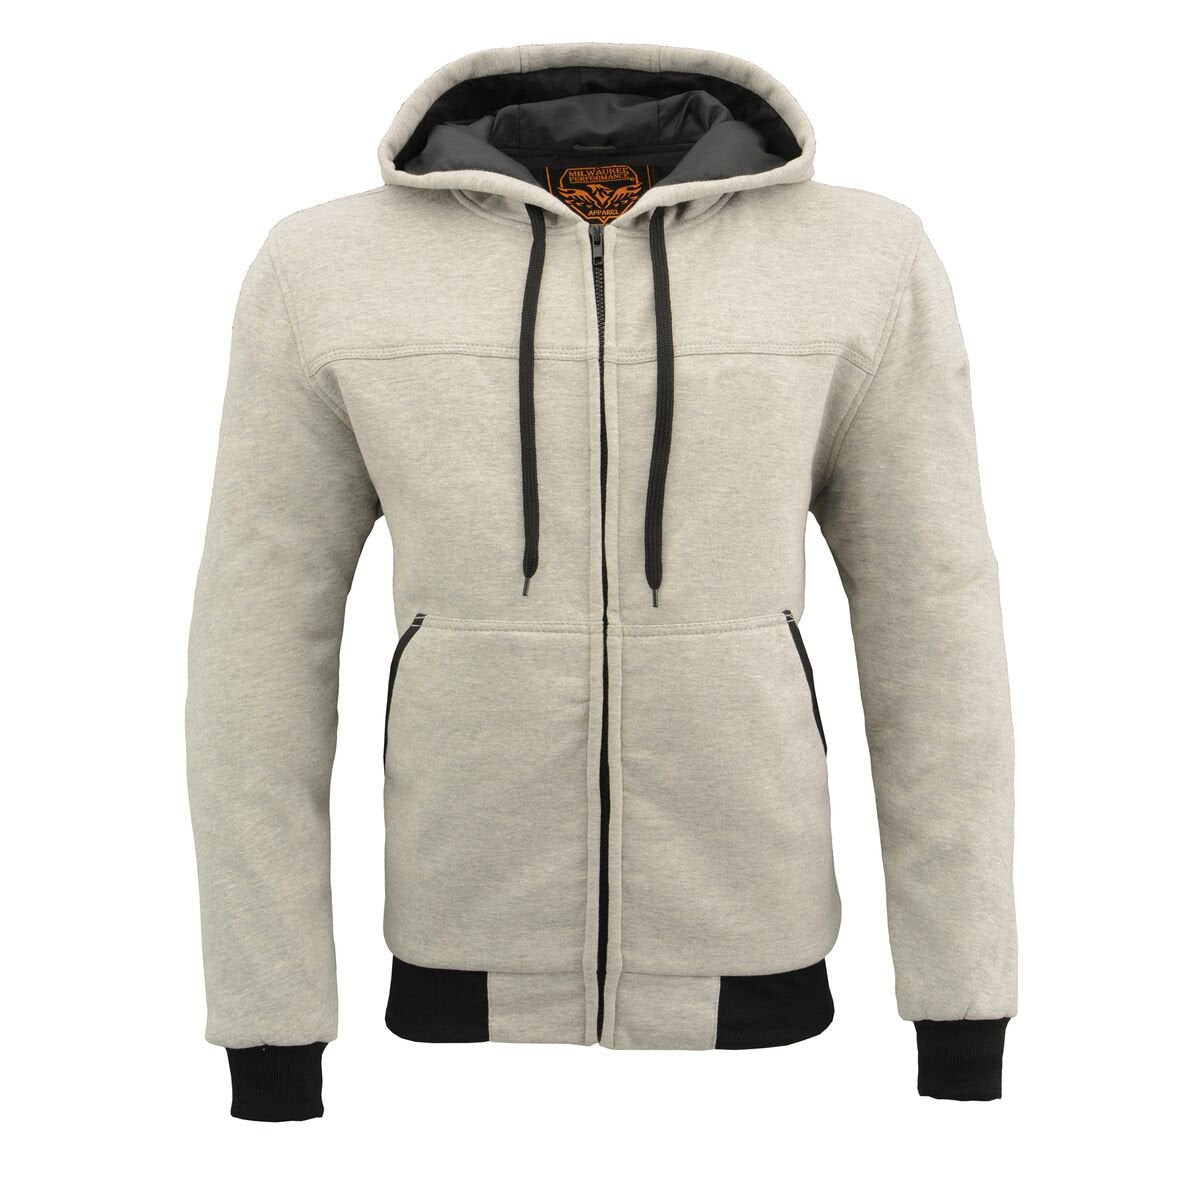 Milwaukee Leather MPM1788 Men's Silver CE Approved Armored Riding Hoodie with Aramid by DuPont Fibers